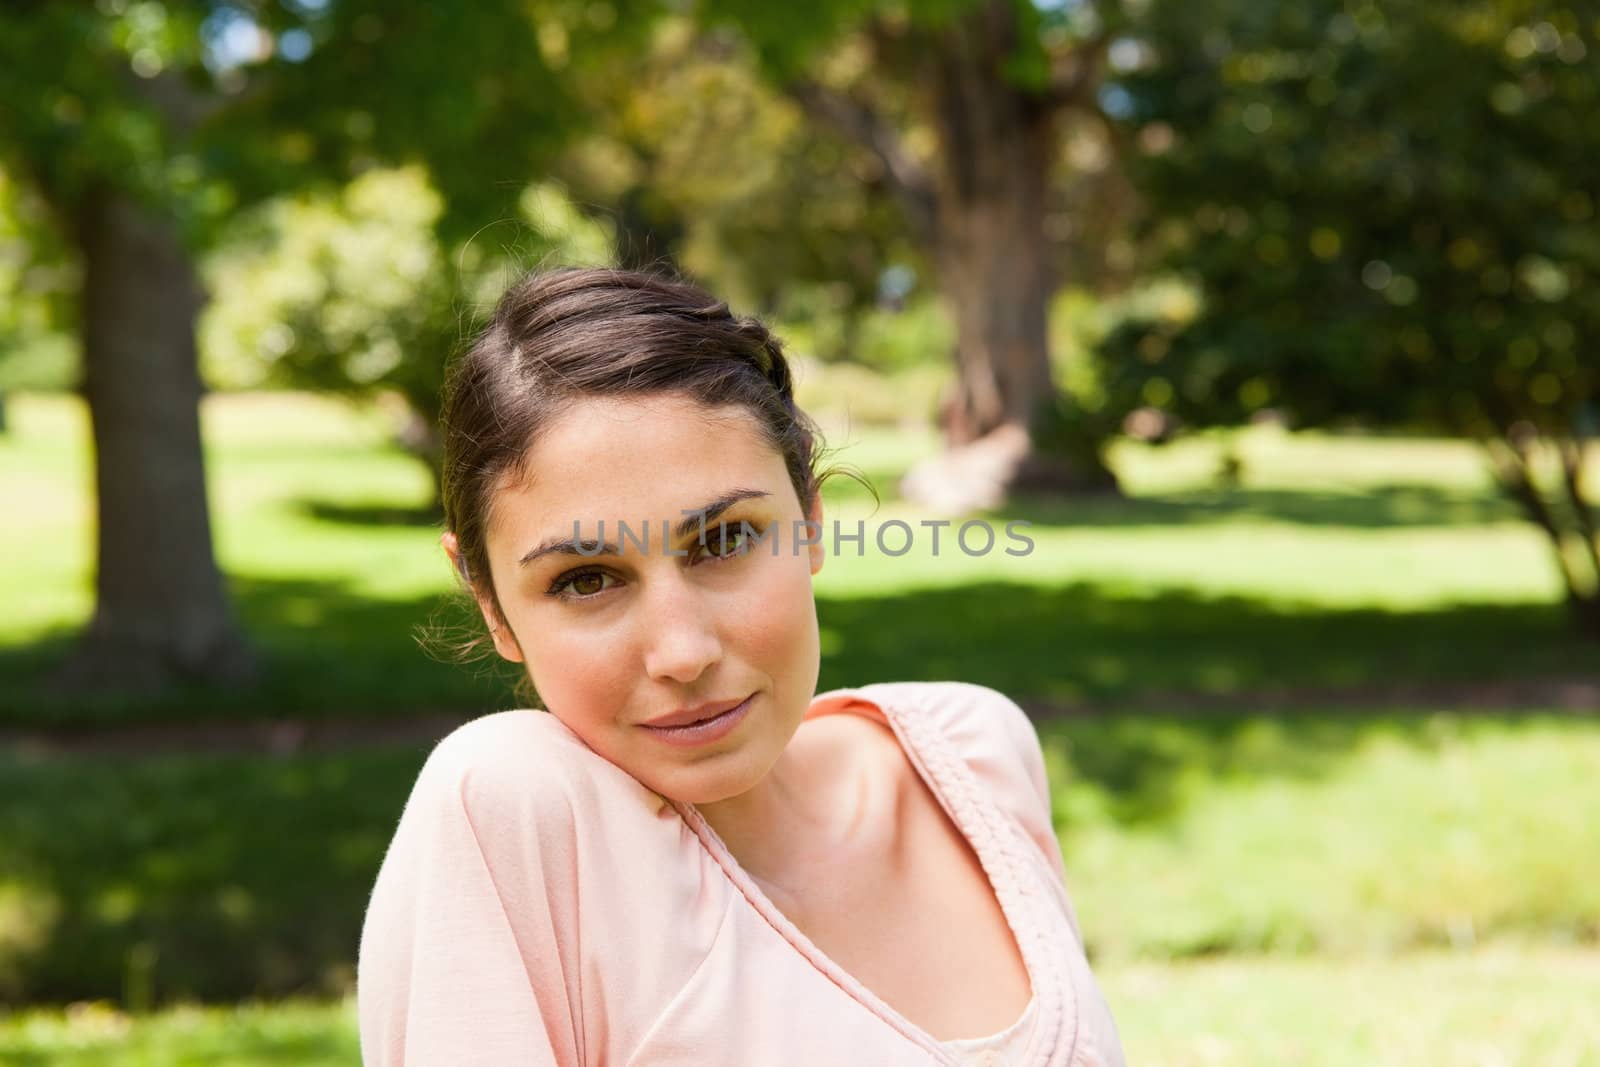 Woman with a serious expression on her face looking straight ahead with a view of trees in the backgroud